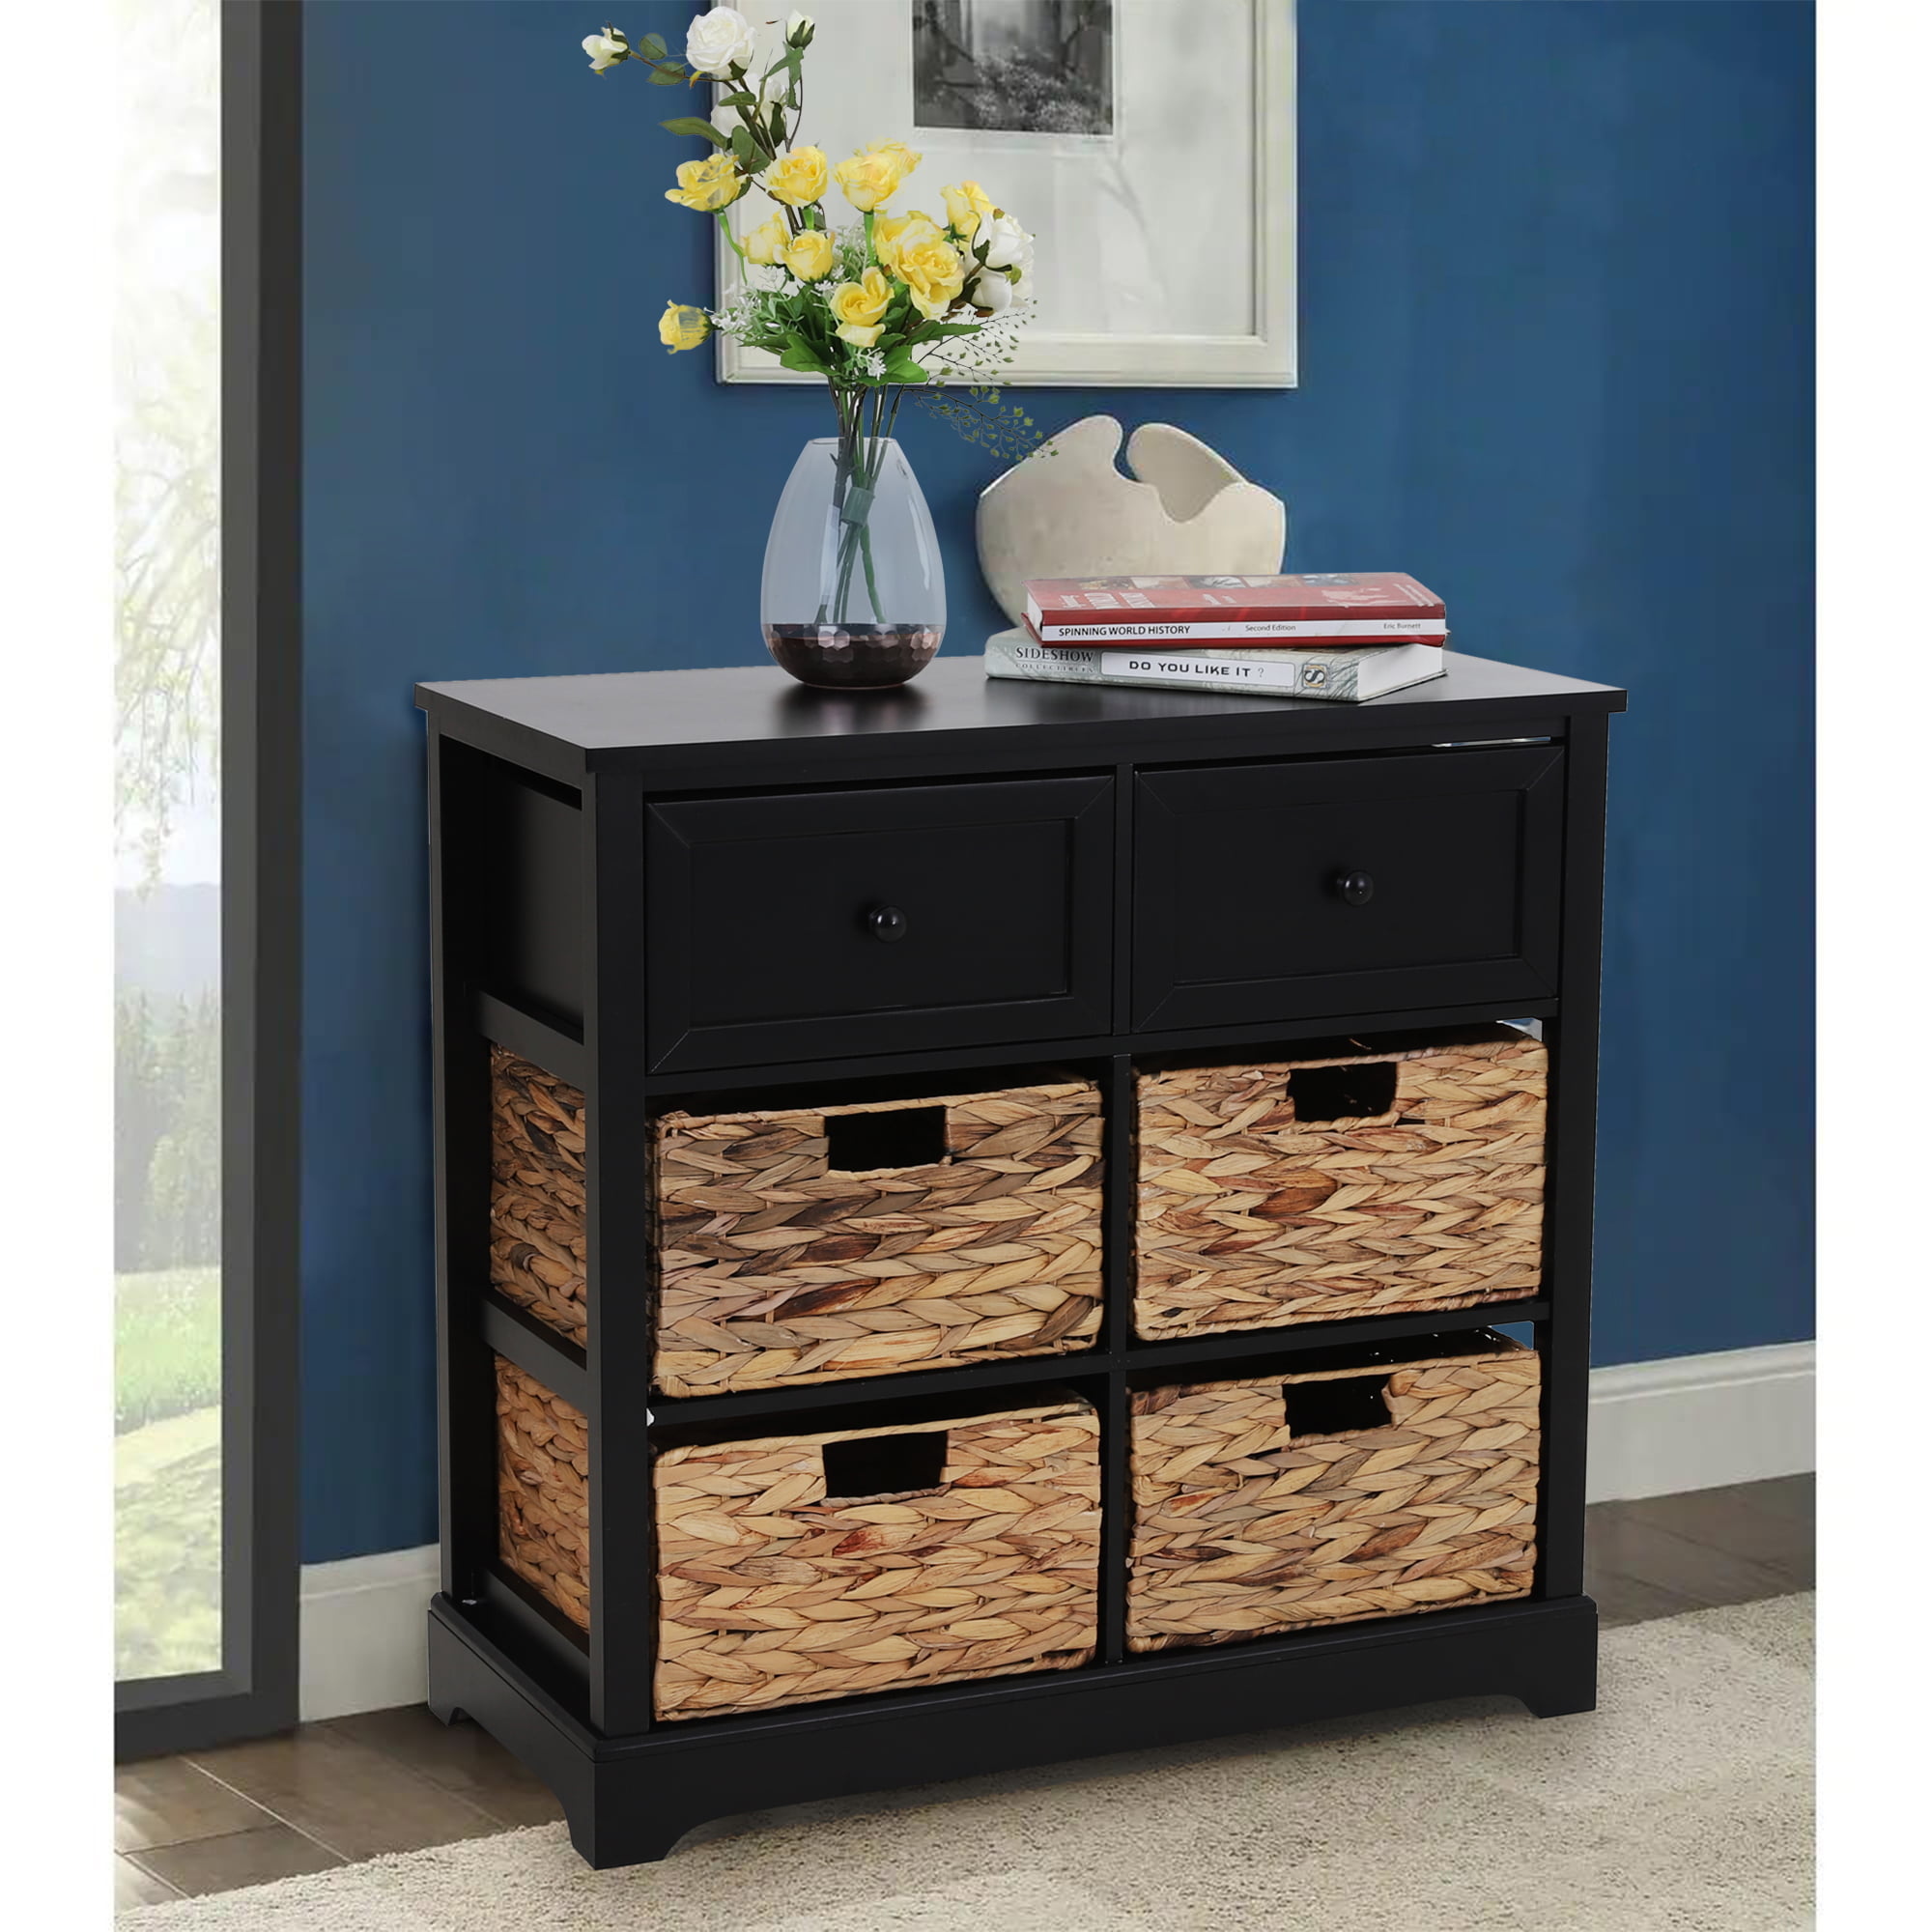 MF Studio Nightstand Four Drawers Decorative Storage Cabinet with Removable Water Hyacinth Woven Baskets, Black